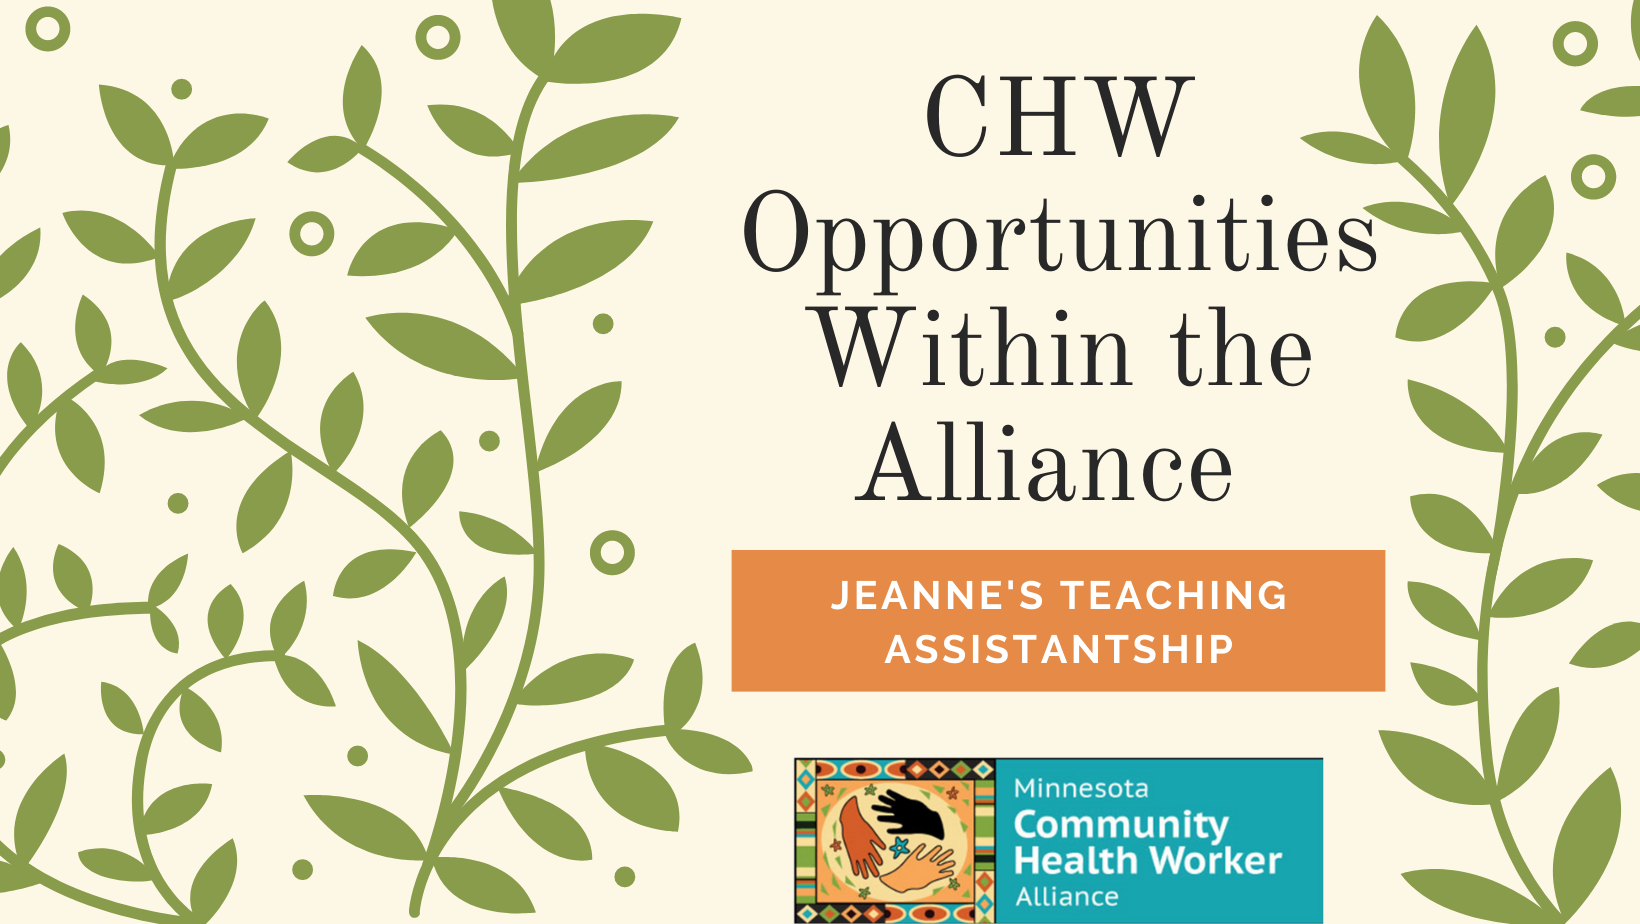 Opportunities with the Alliance: Jeanne